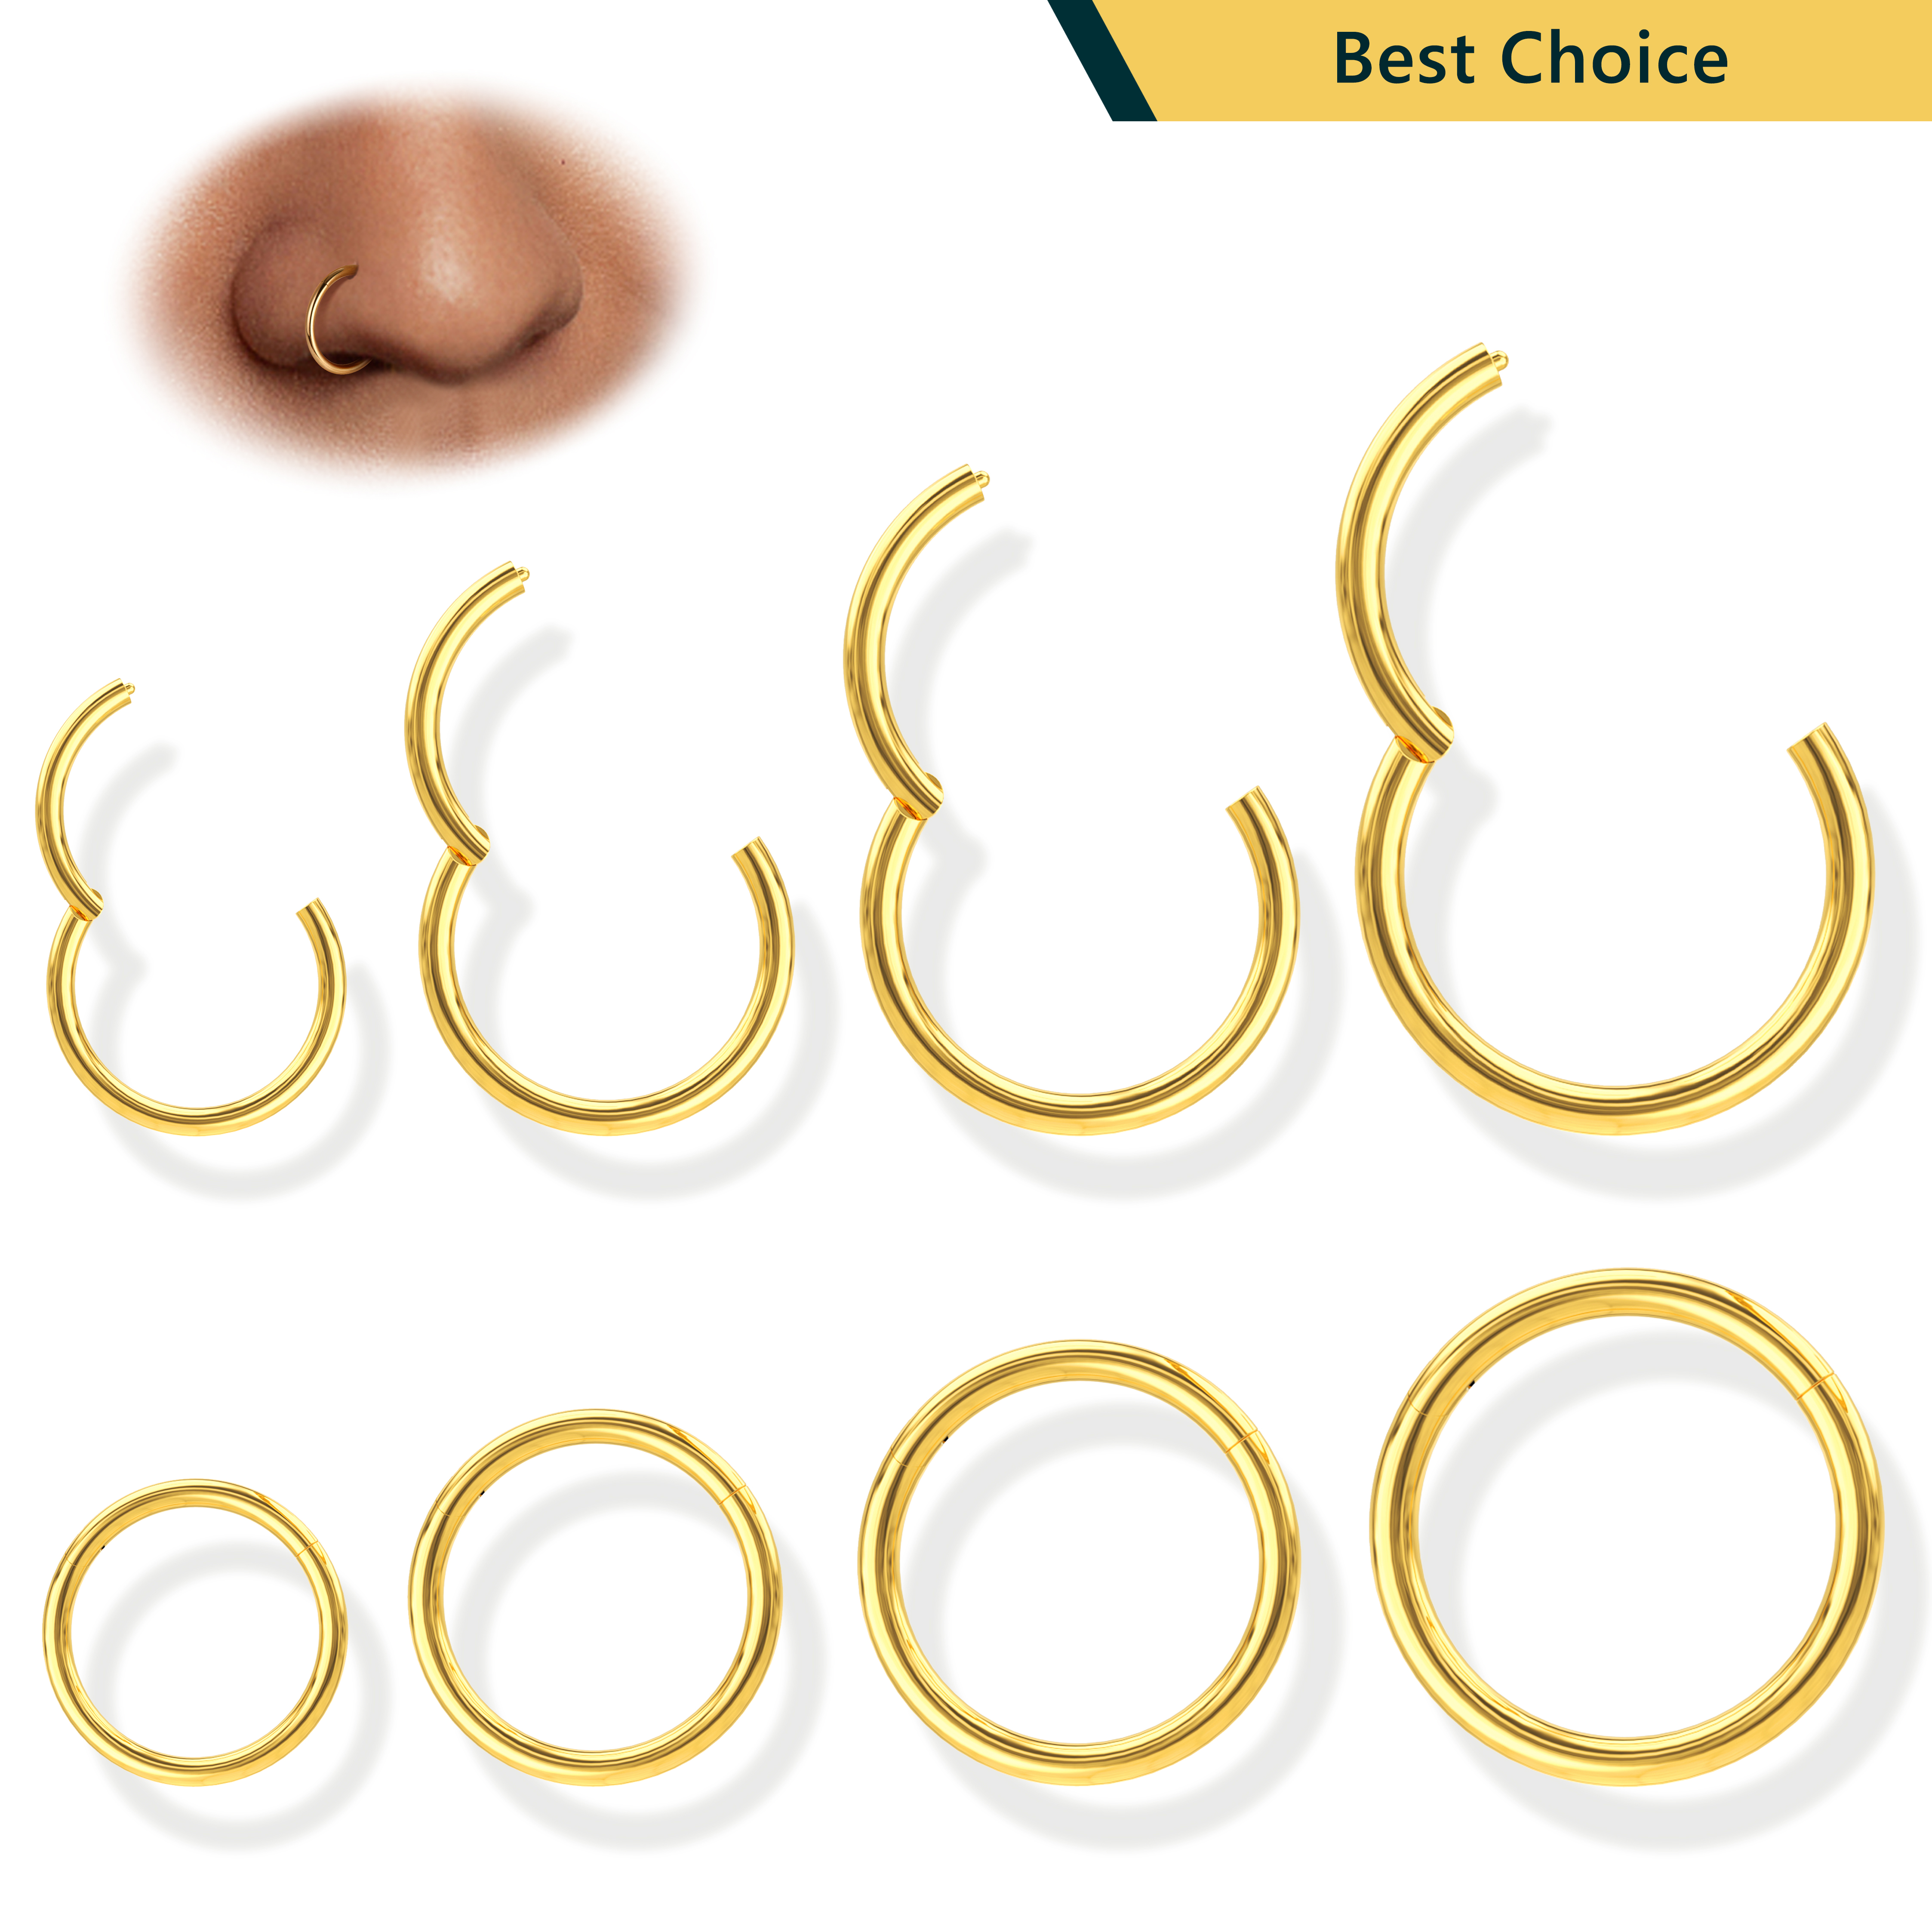 BodyBonita 8 pcs 16G/18G 316L Surgical Steel Seamless Hinged Nose Rings Hoops Septum Rings Lip Rings Hypoallergenic | Earrings for Helix Cartilage Conch Rook Daith Lobe Cartilage Tragus Piercing Jewelry | Black Silver Gold Nose Rings Cilcker Body Piercing for Women Men 6mm 8mm 10mm 12mm